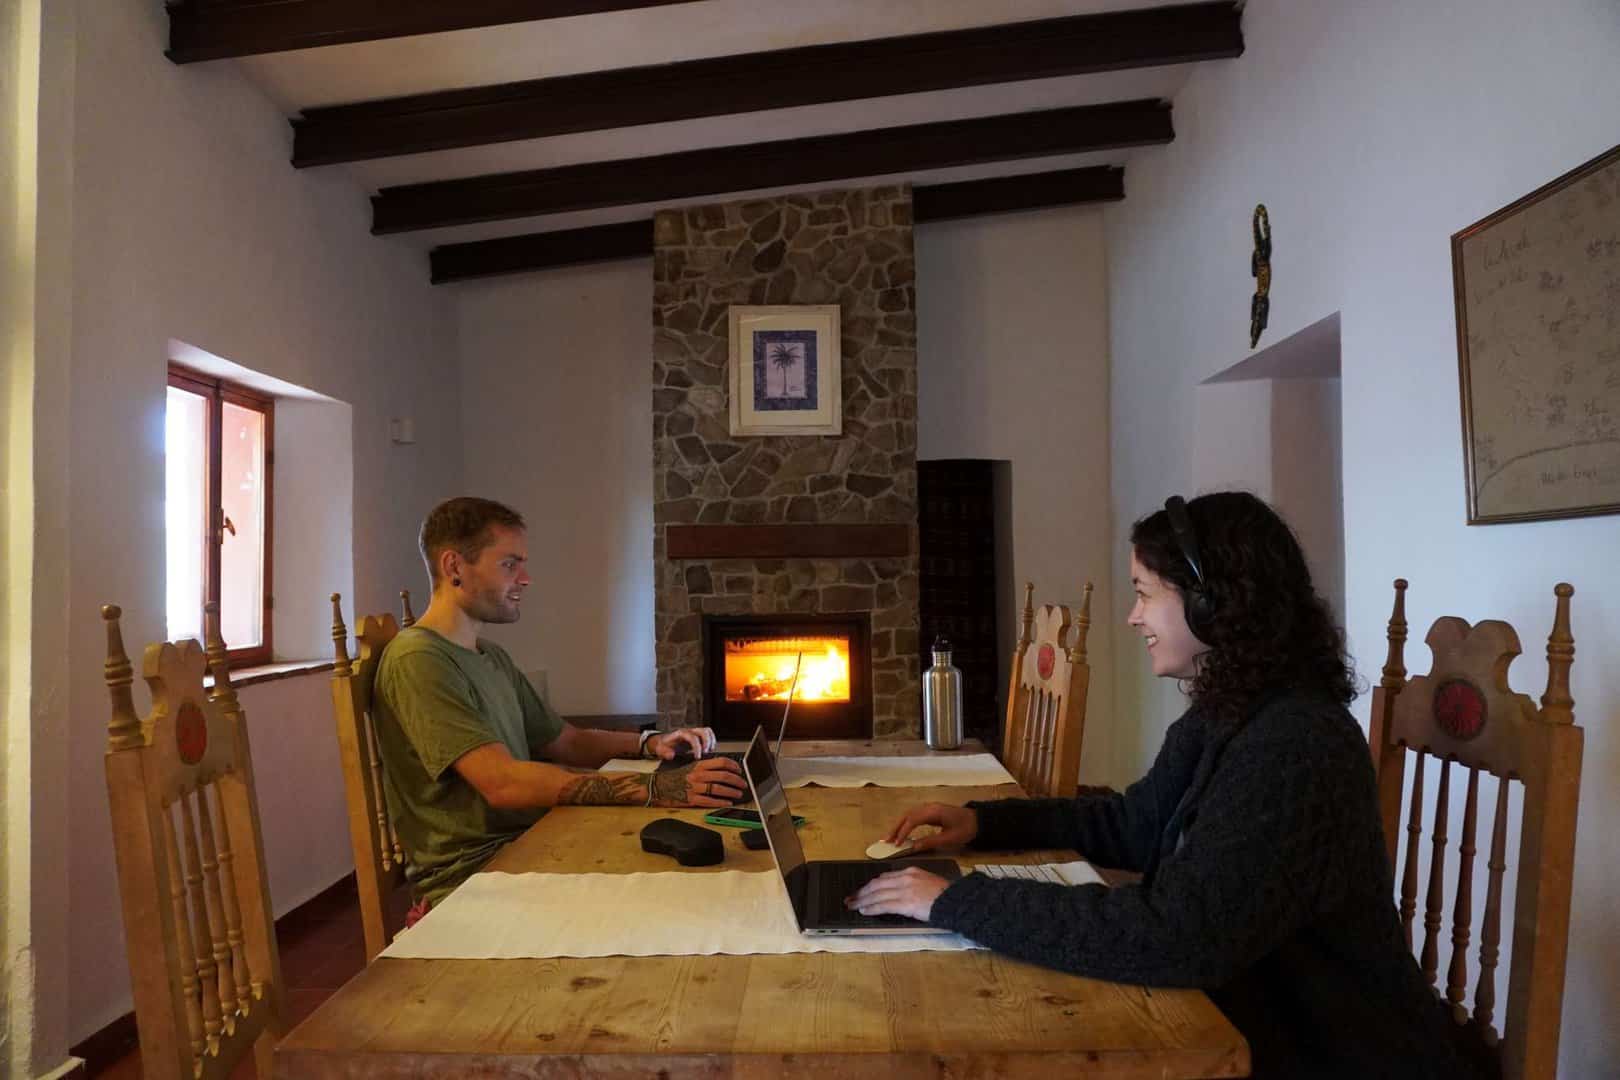 2 people sitting on a wooden table with their laptops, a fireplace in the background